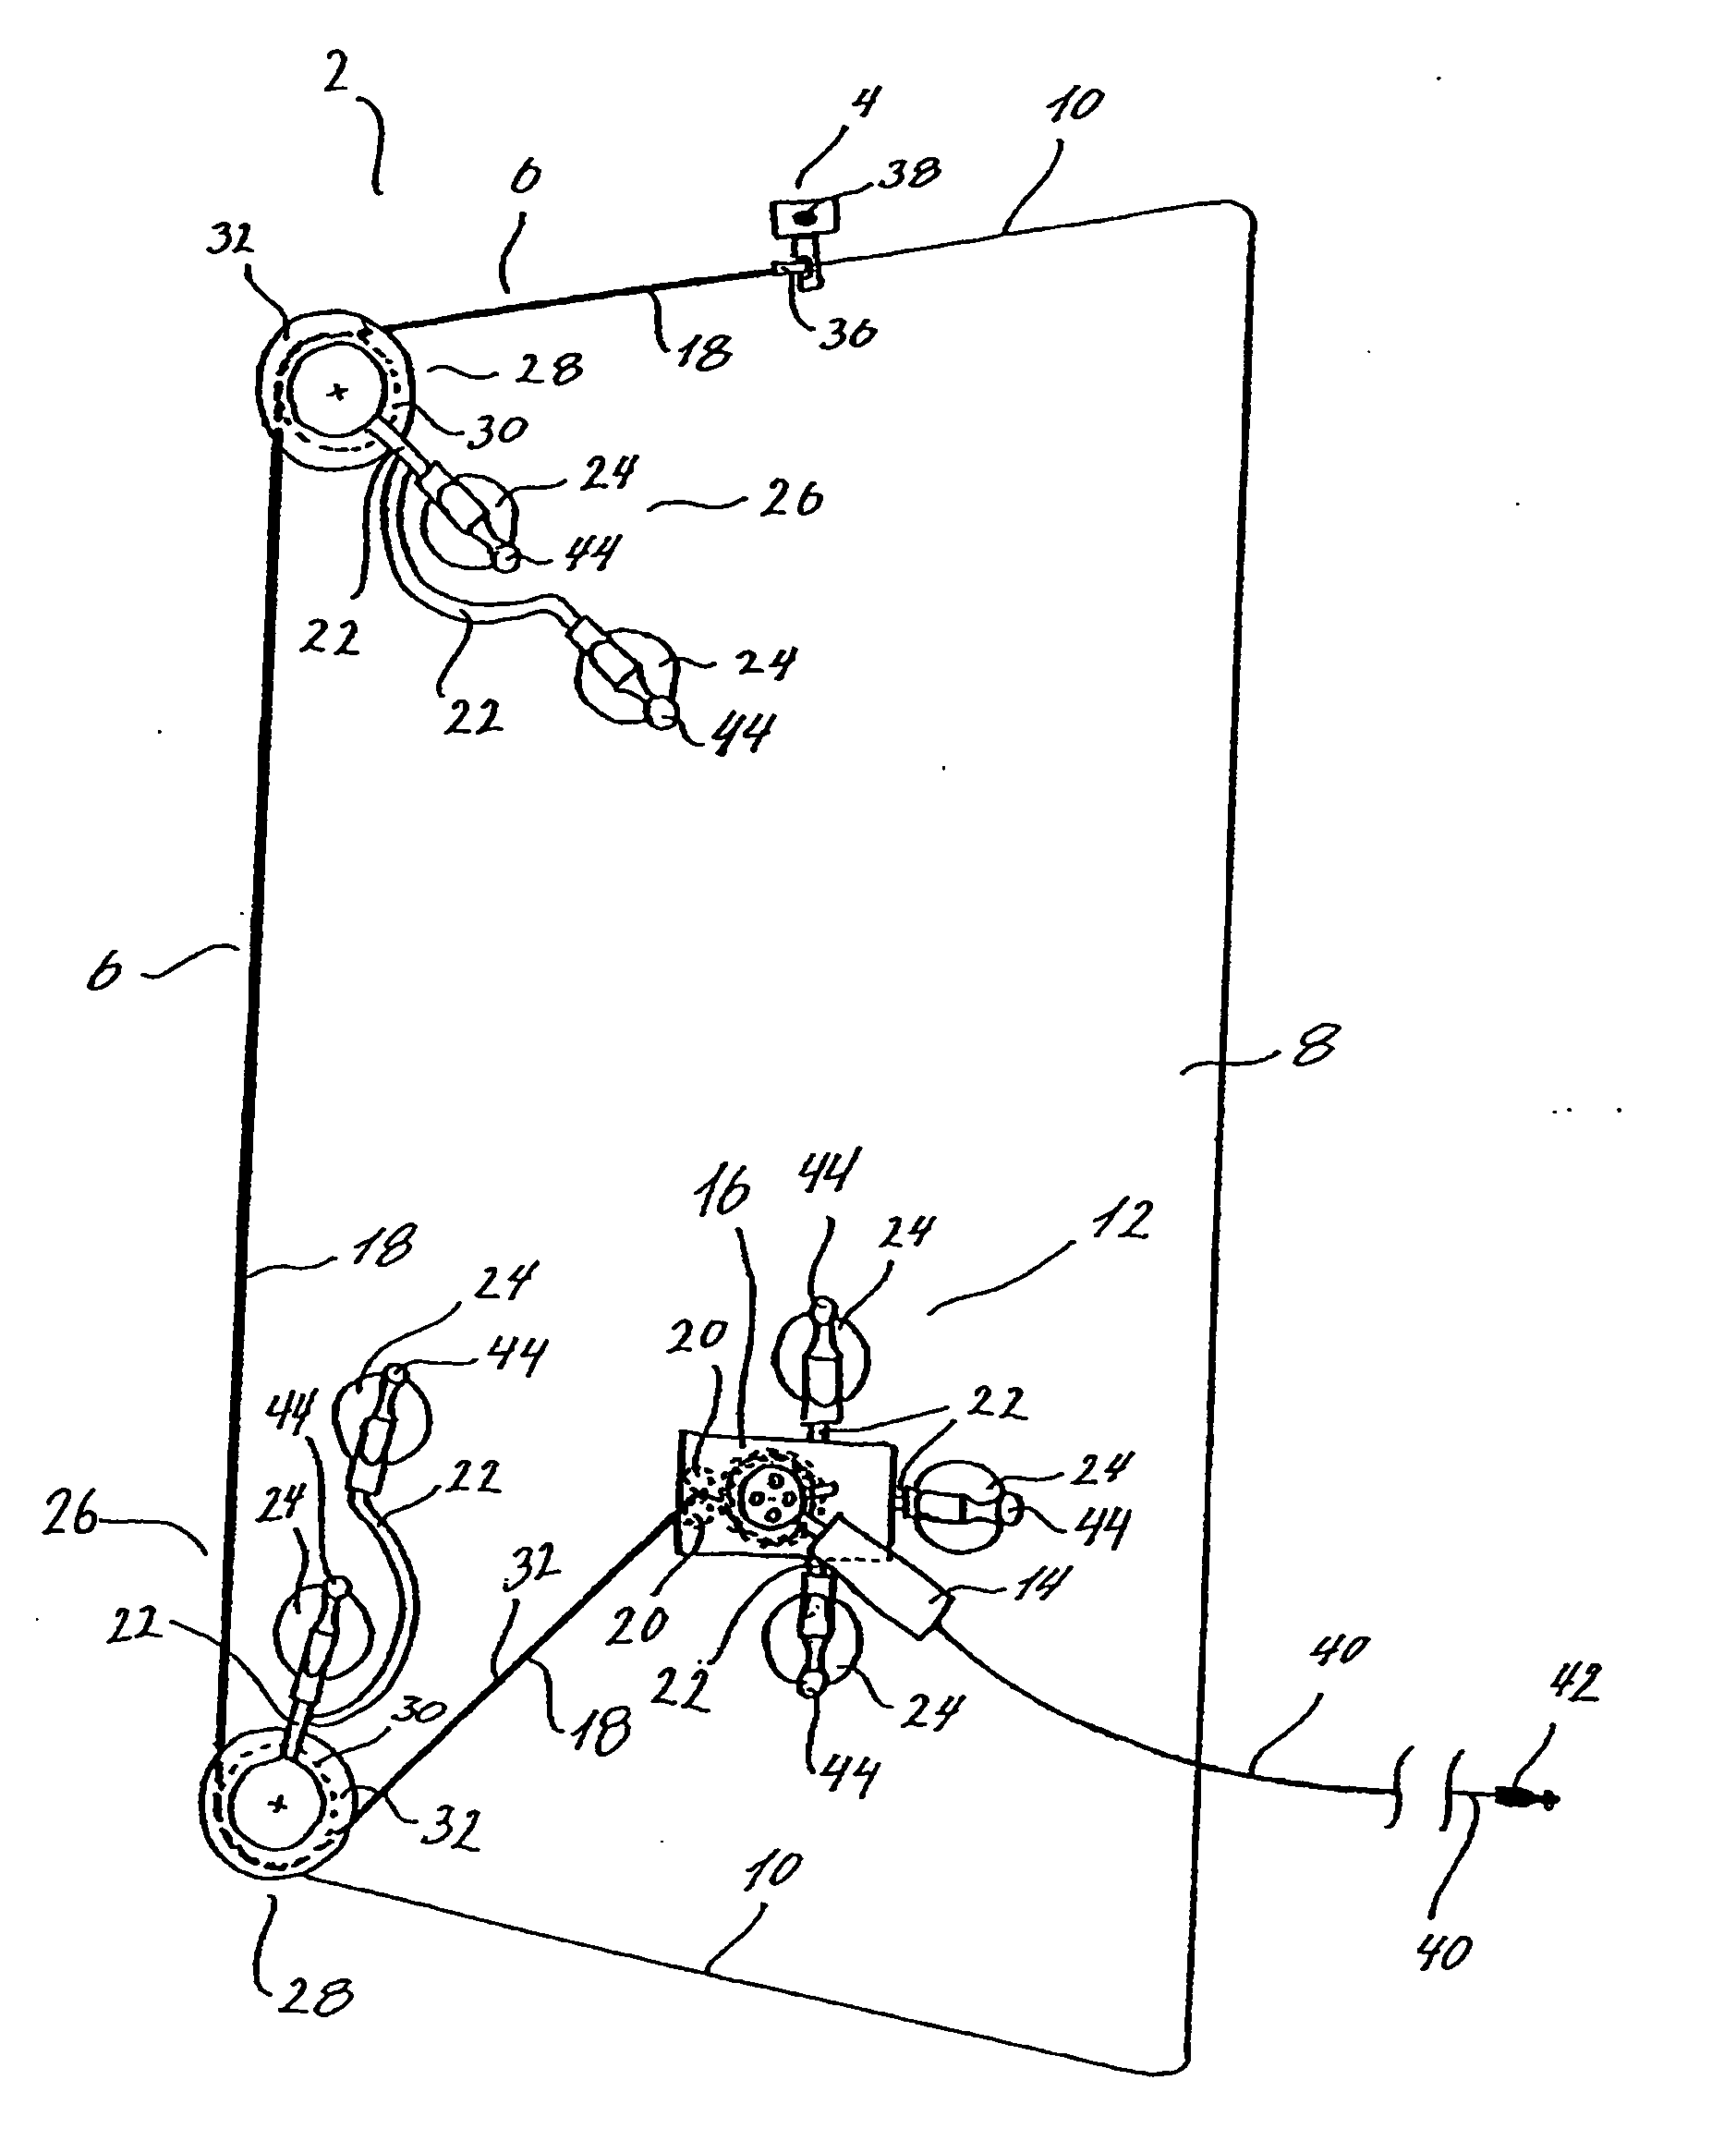 Apparatus and method for guiding a tool along a path on a surface